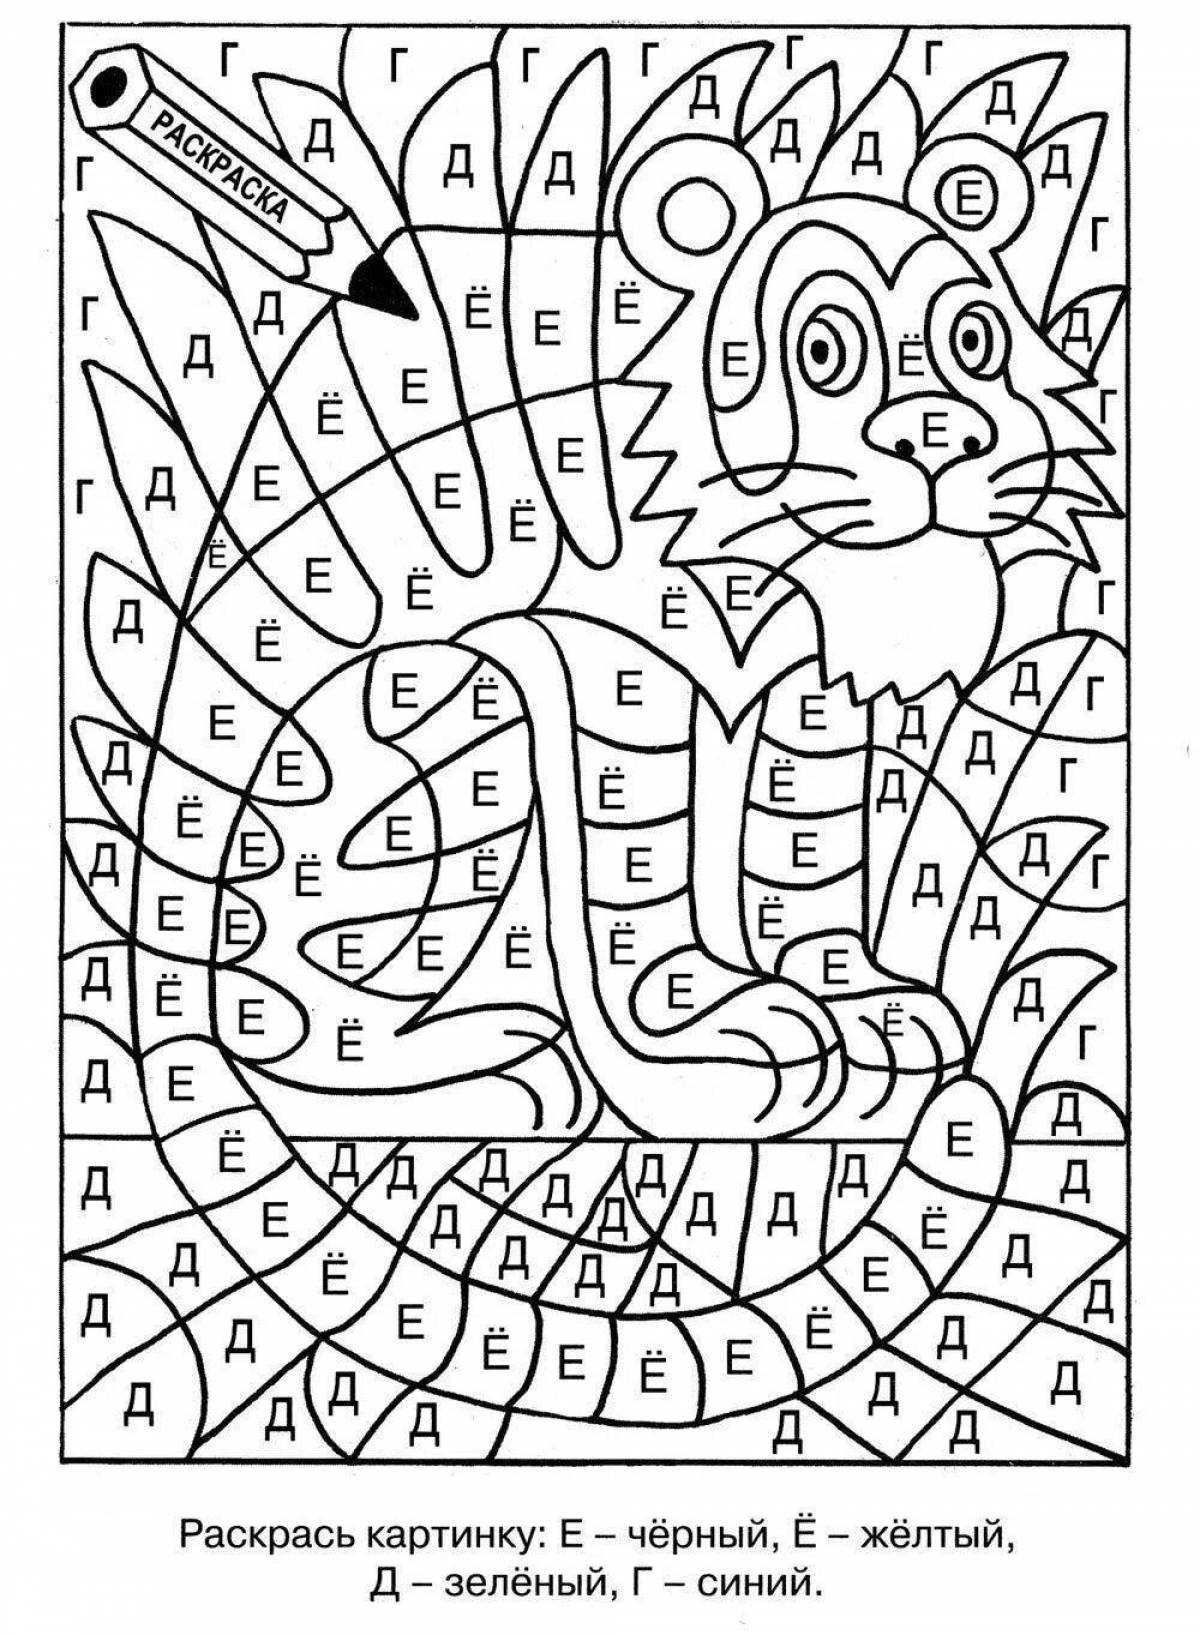 Fascinating coloring book for kids 6-10 years old